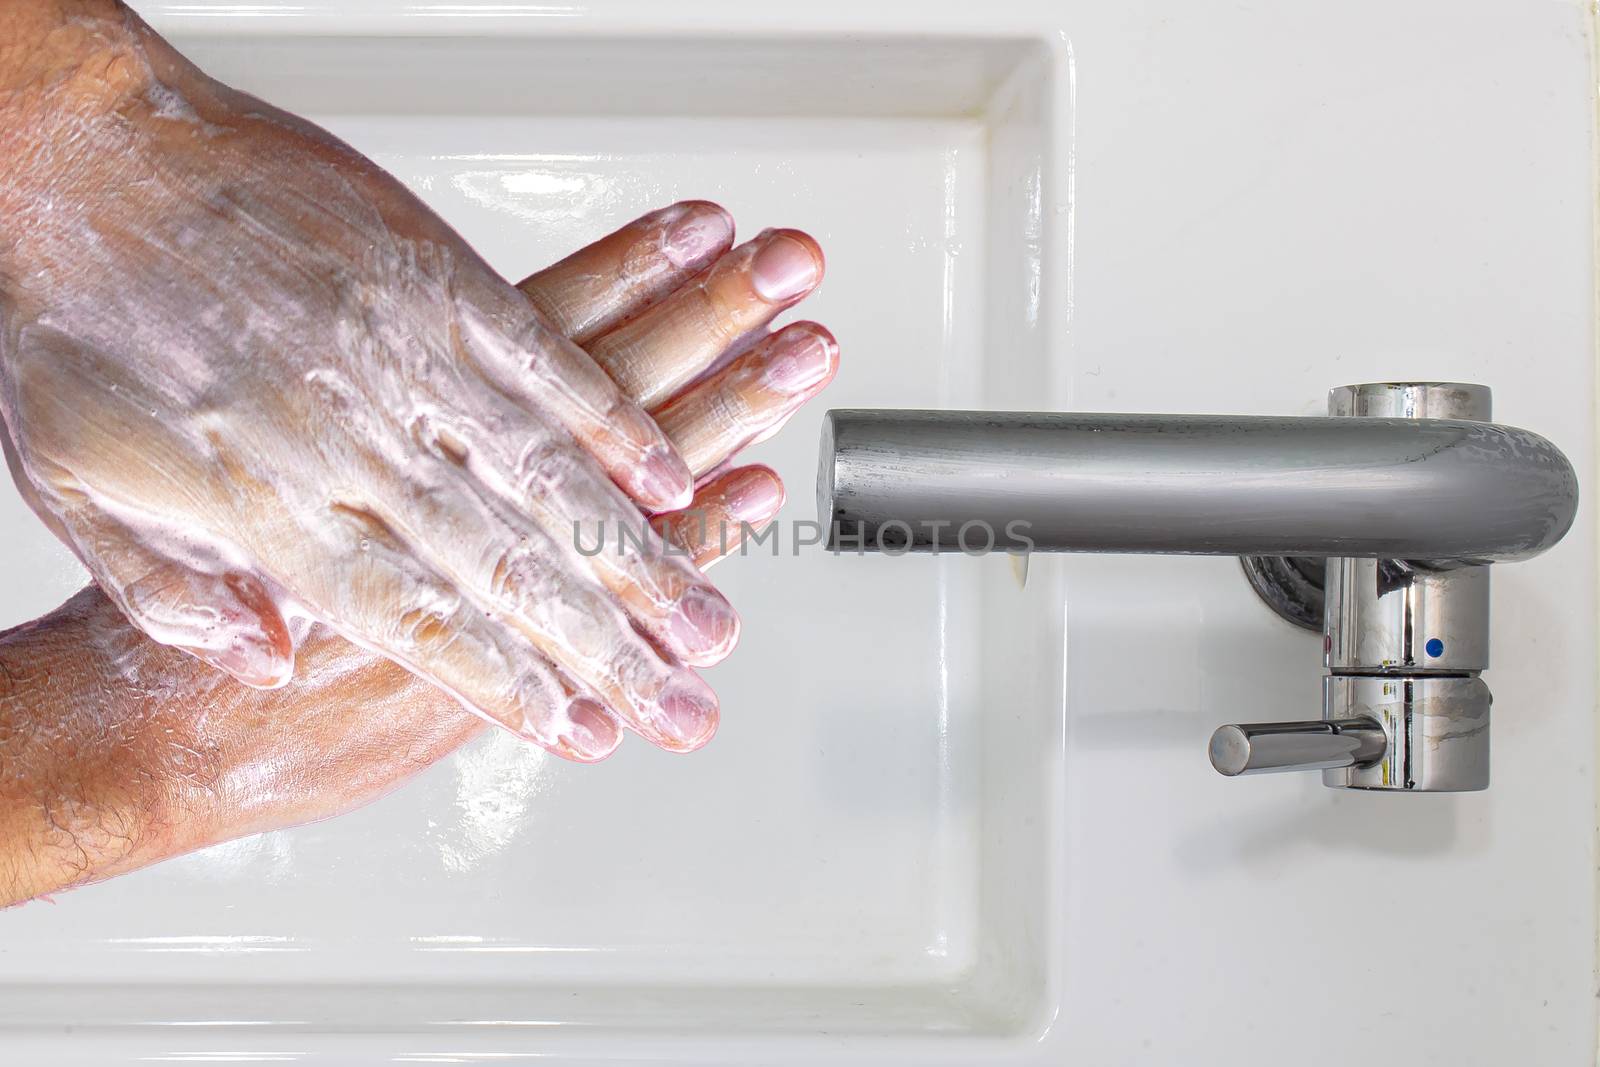 Top view of a person washing hands with soap on a wash basin by oasisamuel